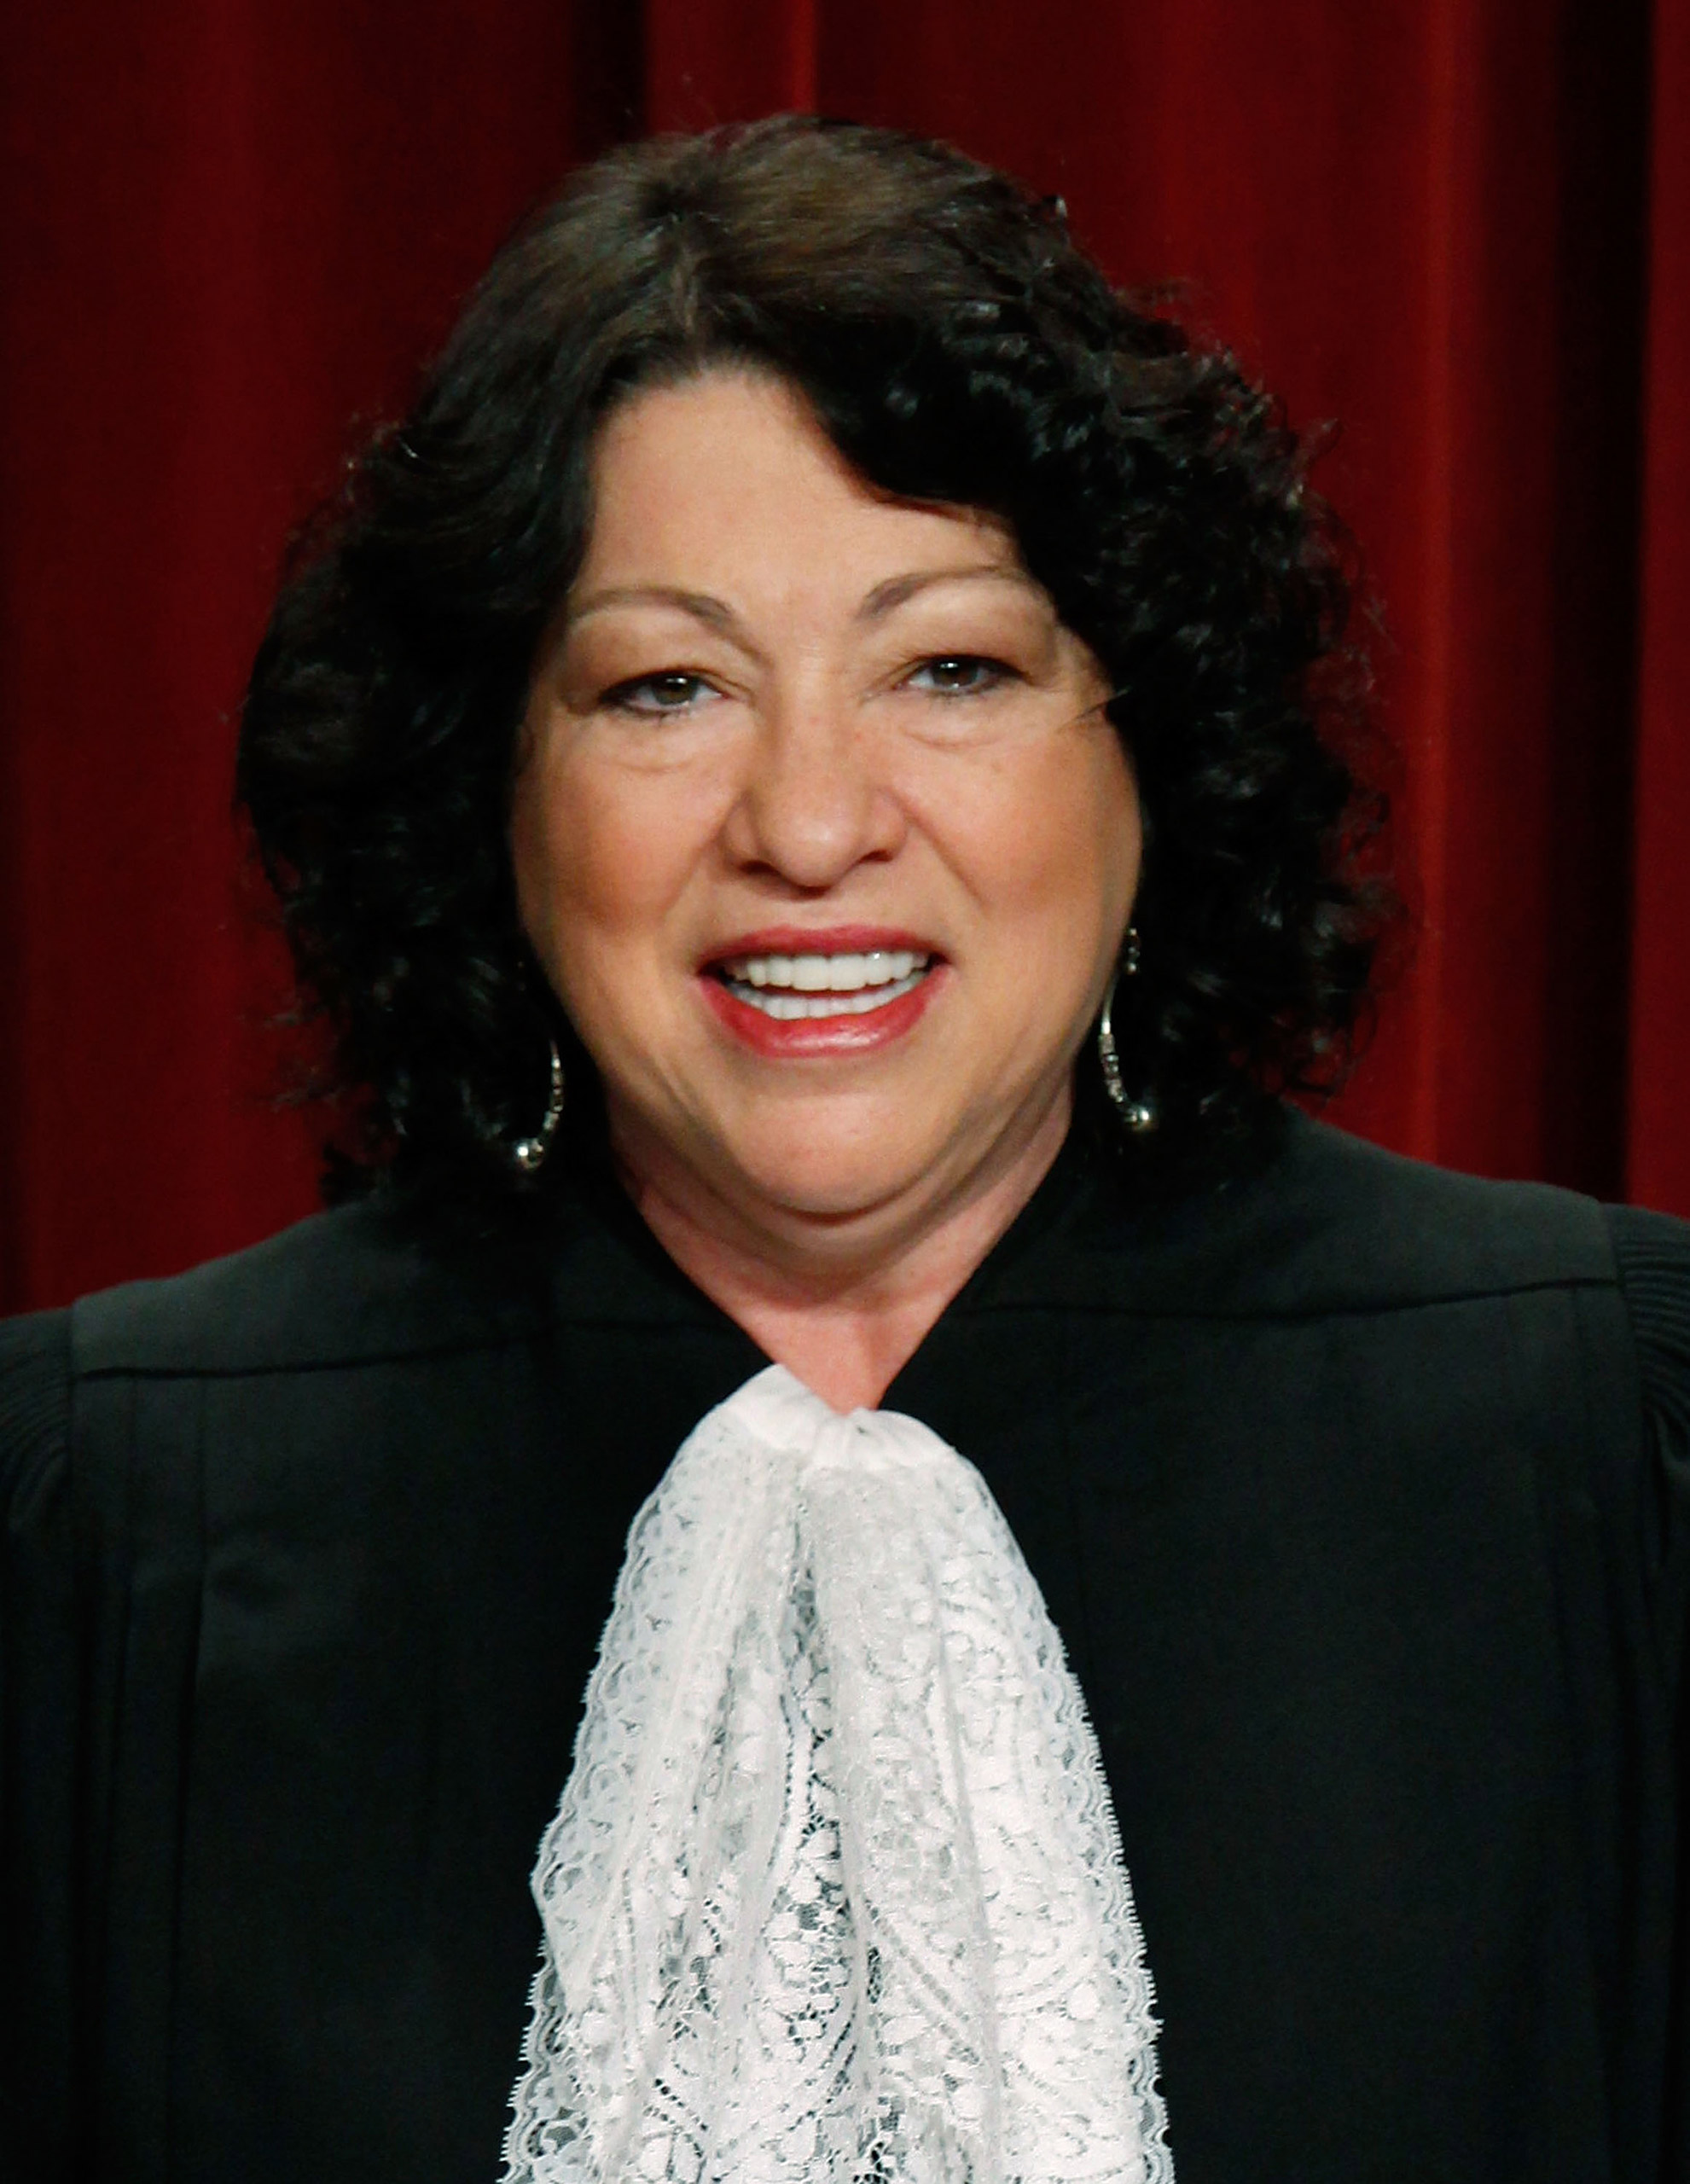 Associate Justice Sonia Sotomayor, poses for a photograph at the Supreme Court building on September 29, 2009 in Washington, DC.